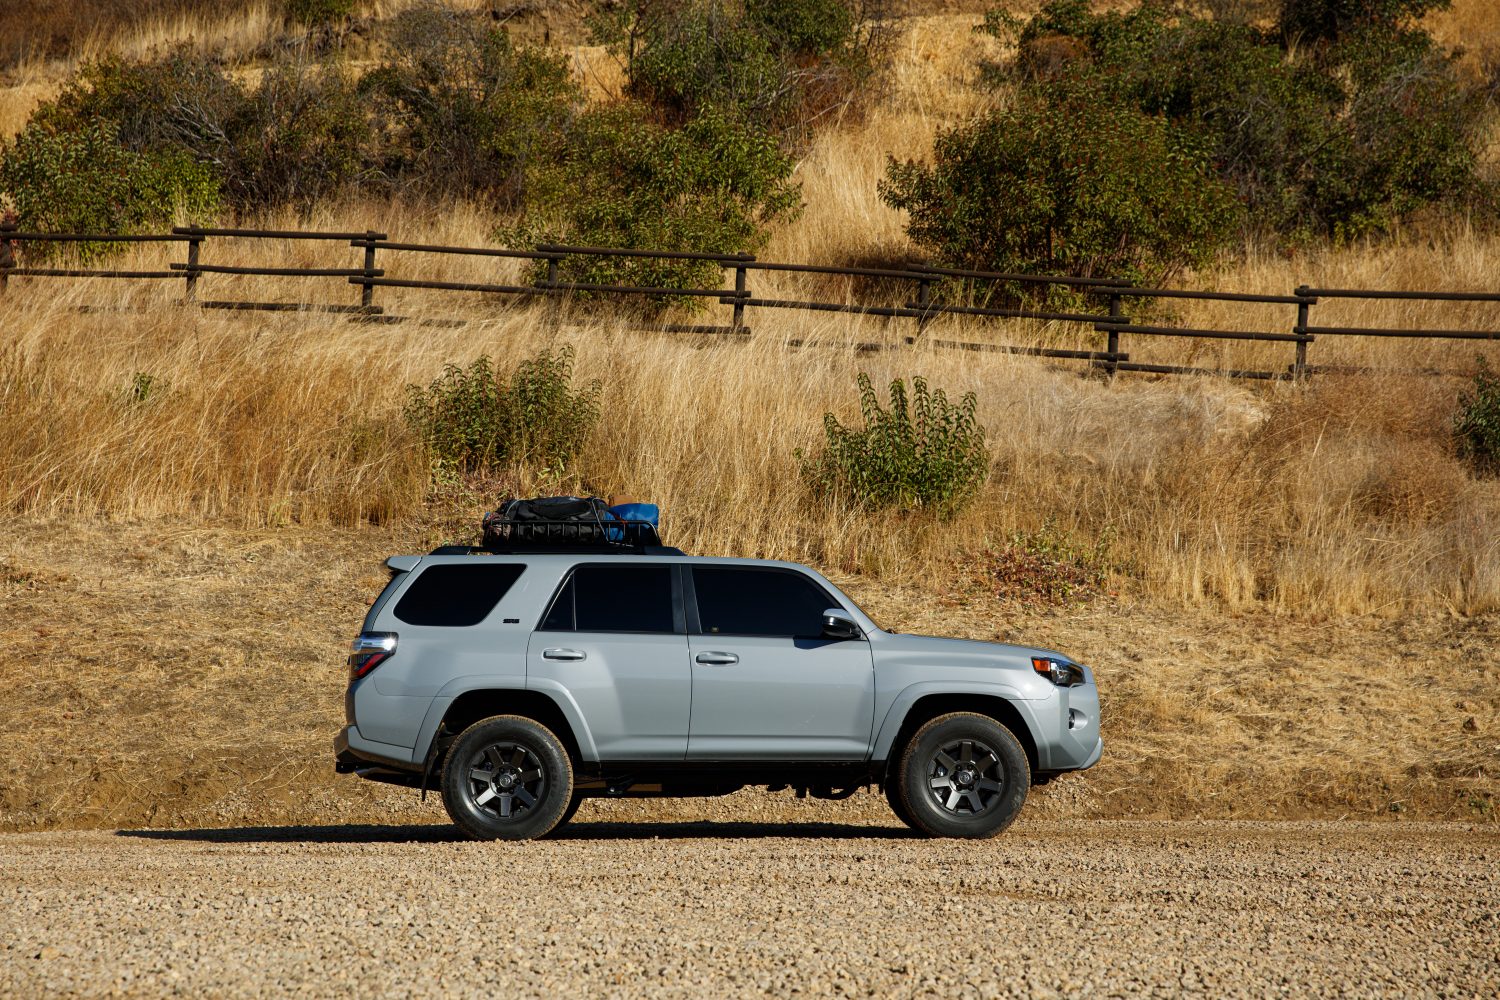 the 2021 Toyota 4Runner trail edition driving off-road in a field